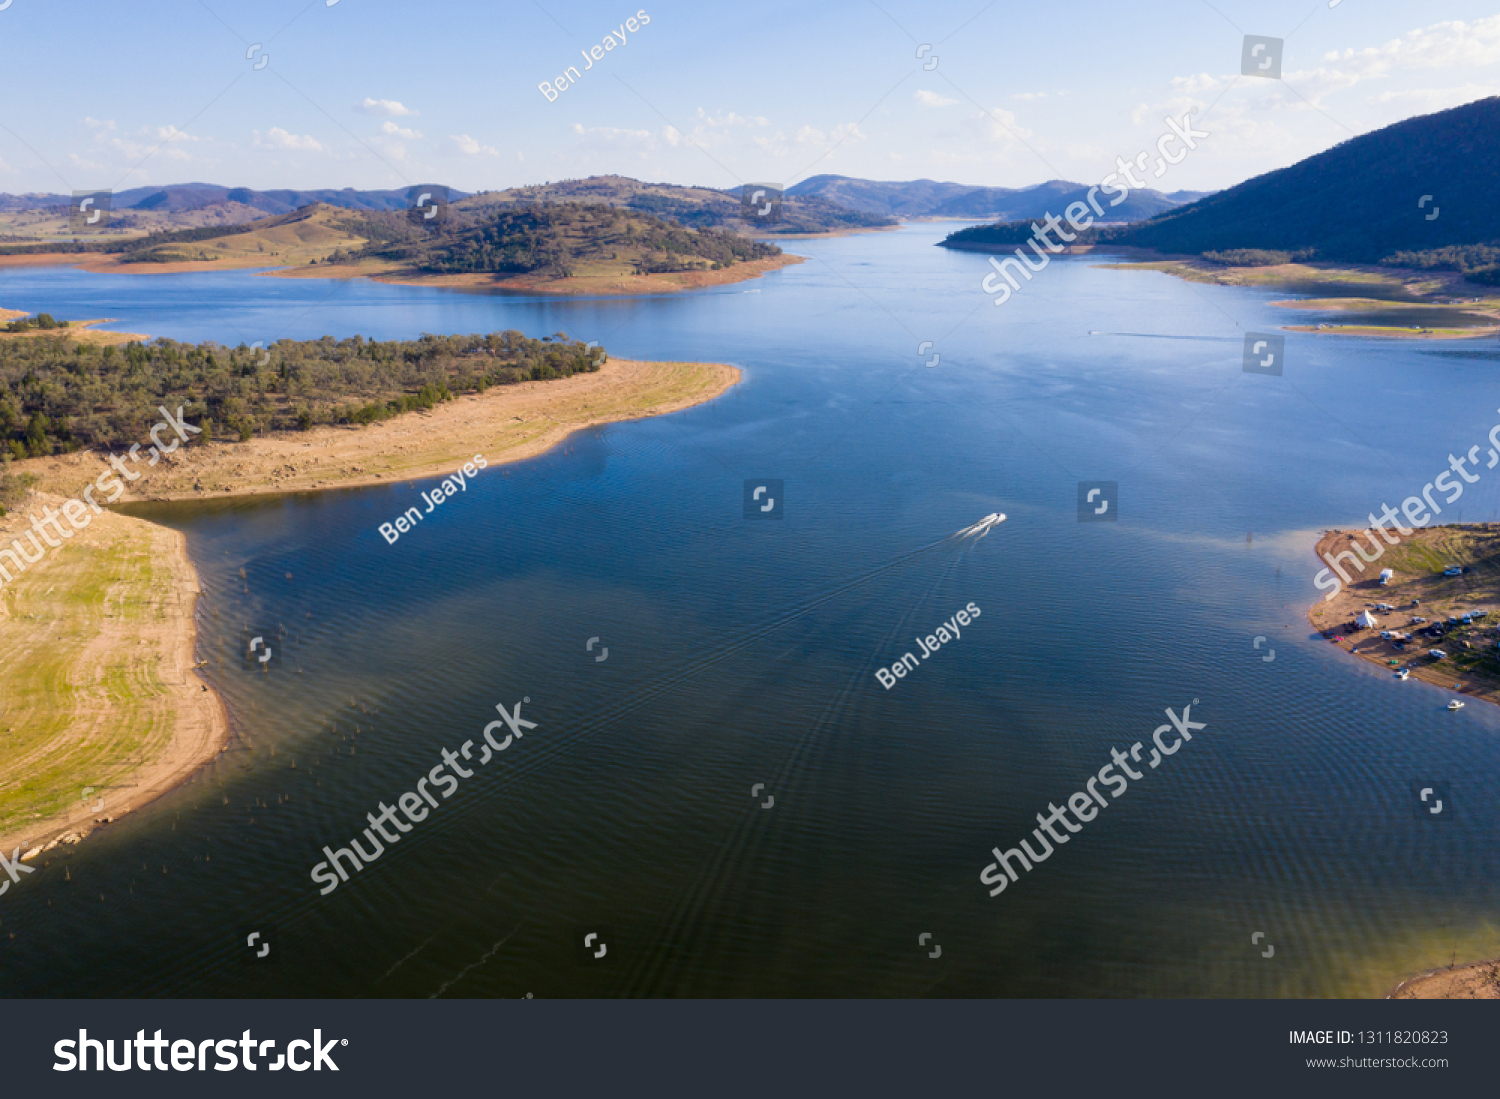 Aerial view of Wyangala Dam in central NSW. The Dam provides water storage for the Lachlan River and recreation area for camping and boating activities. #1311820823